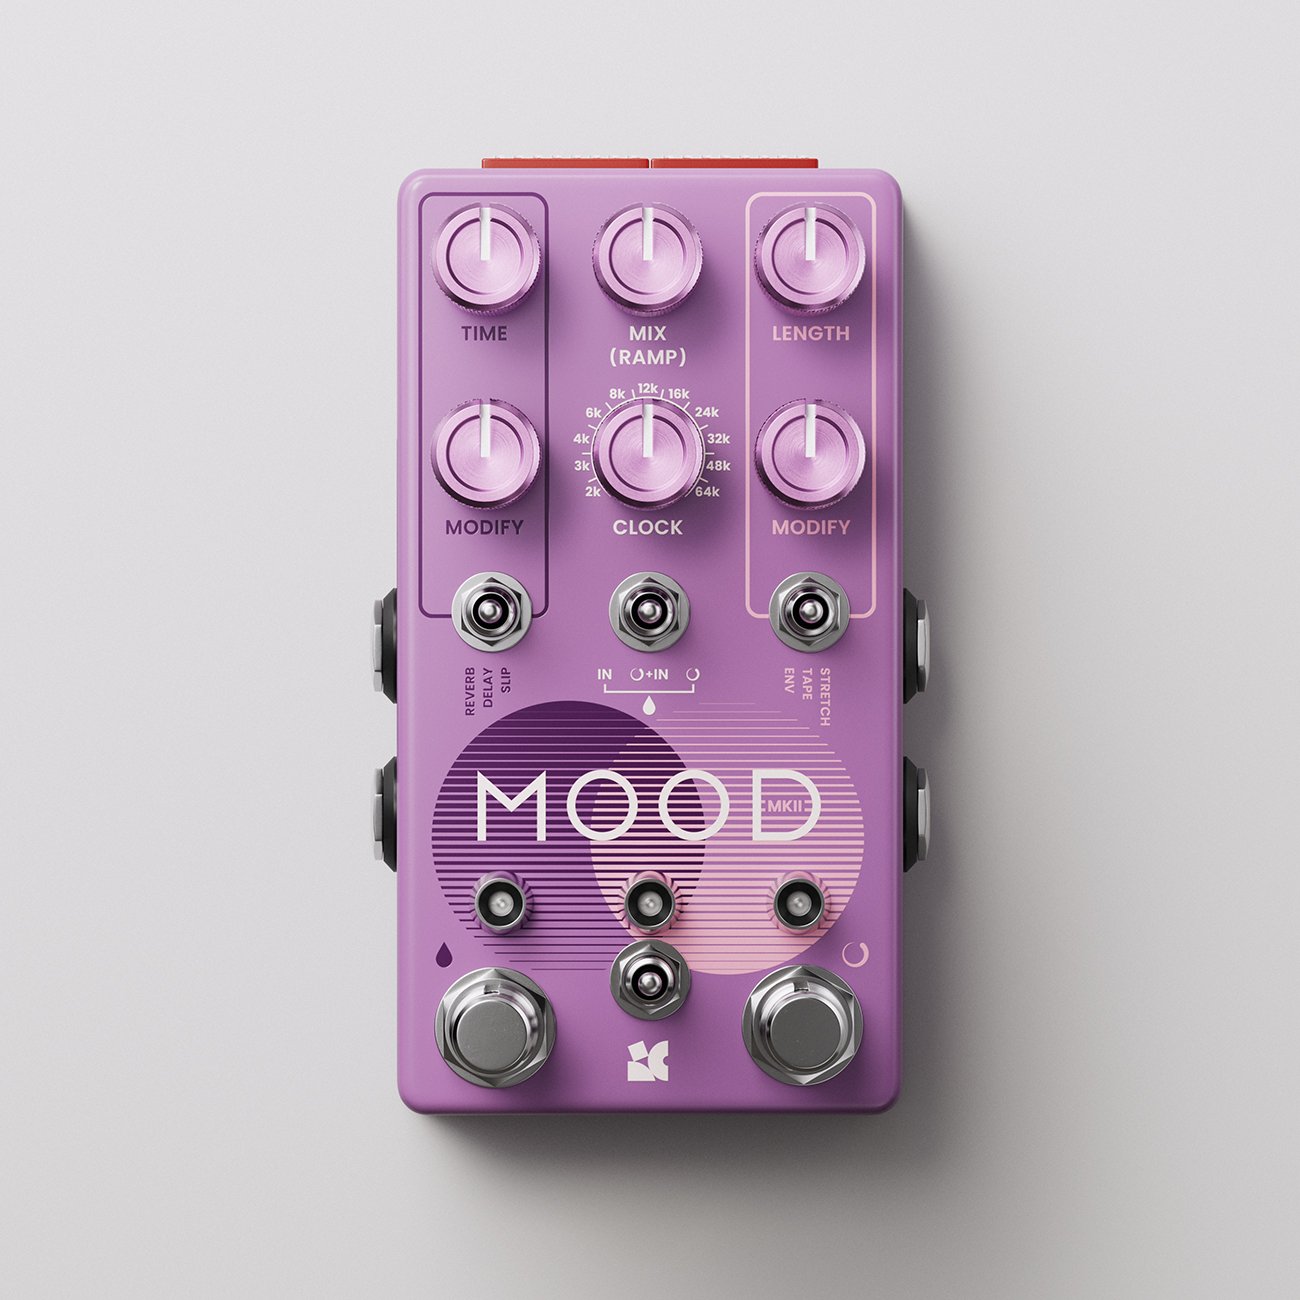 MOOD MKII — Chase Bliss